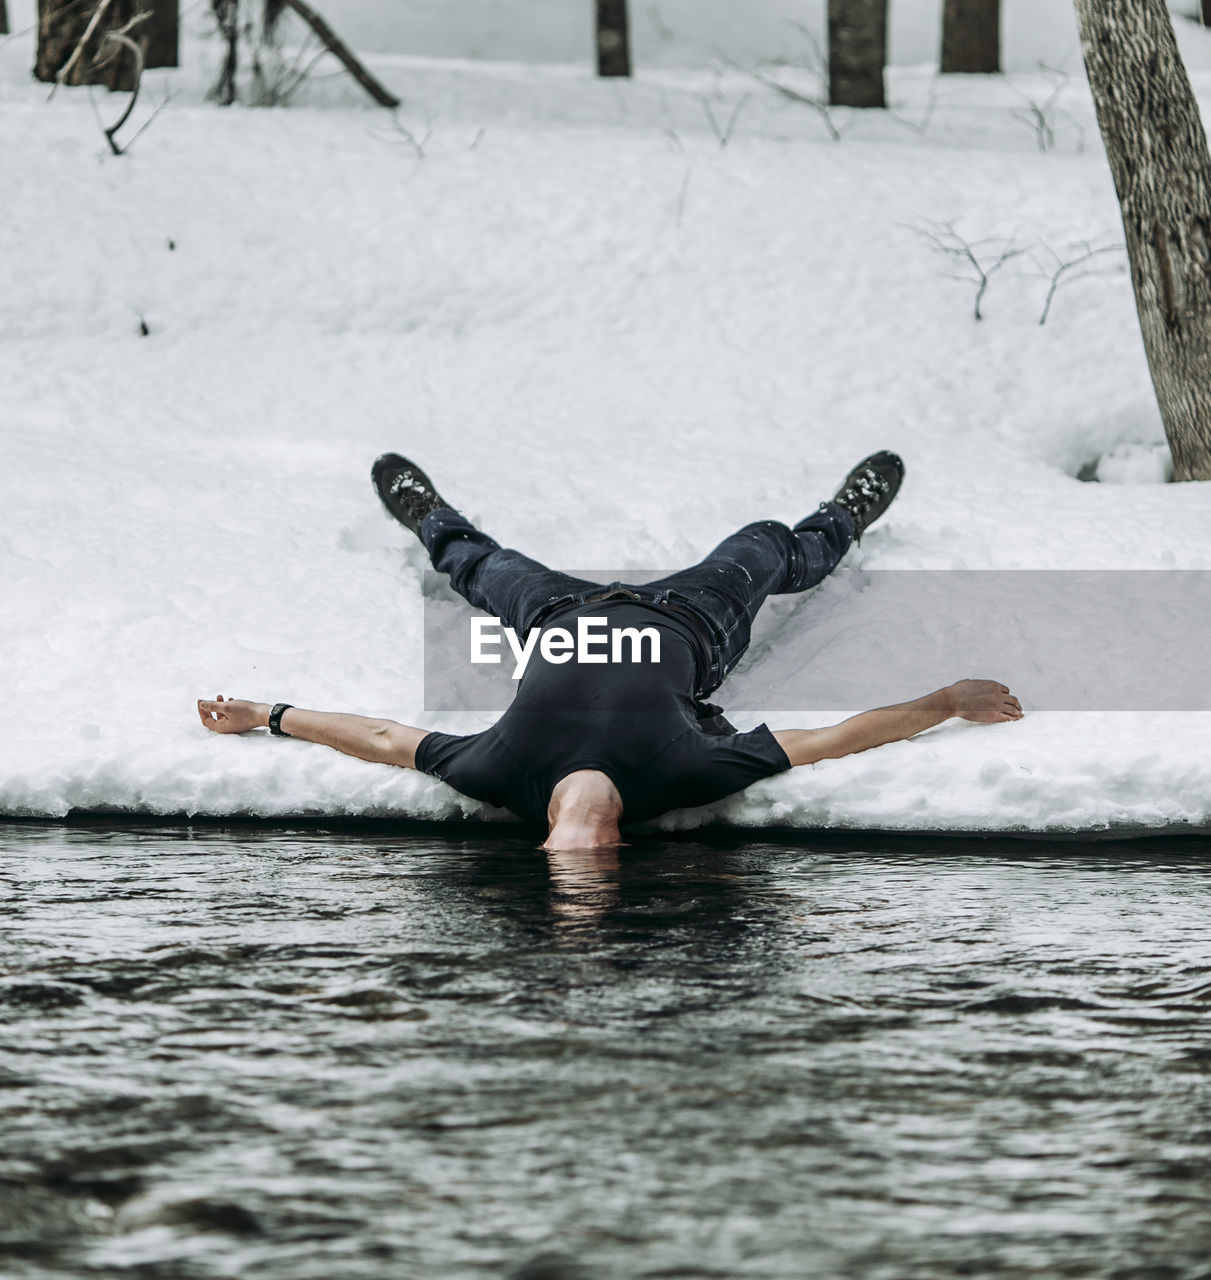 Man lies on back in snow spread eagle with head underwater in river person